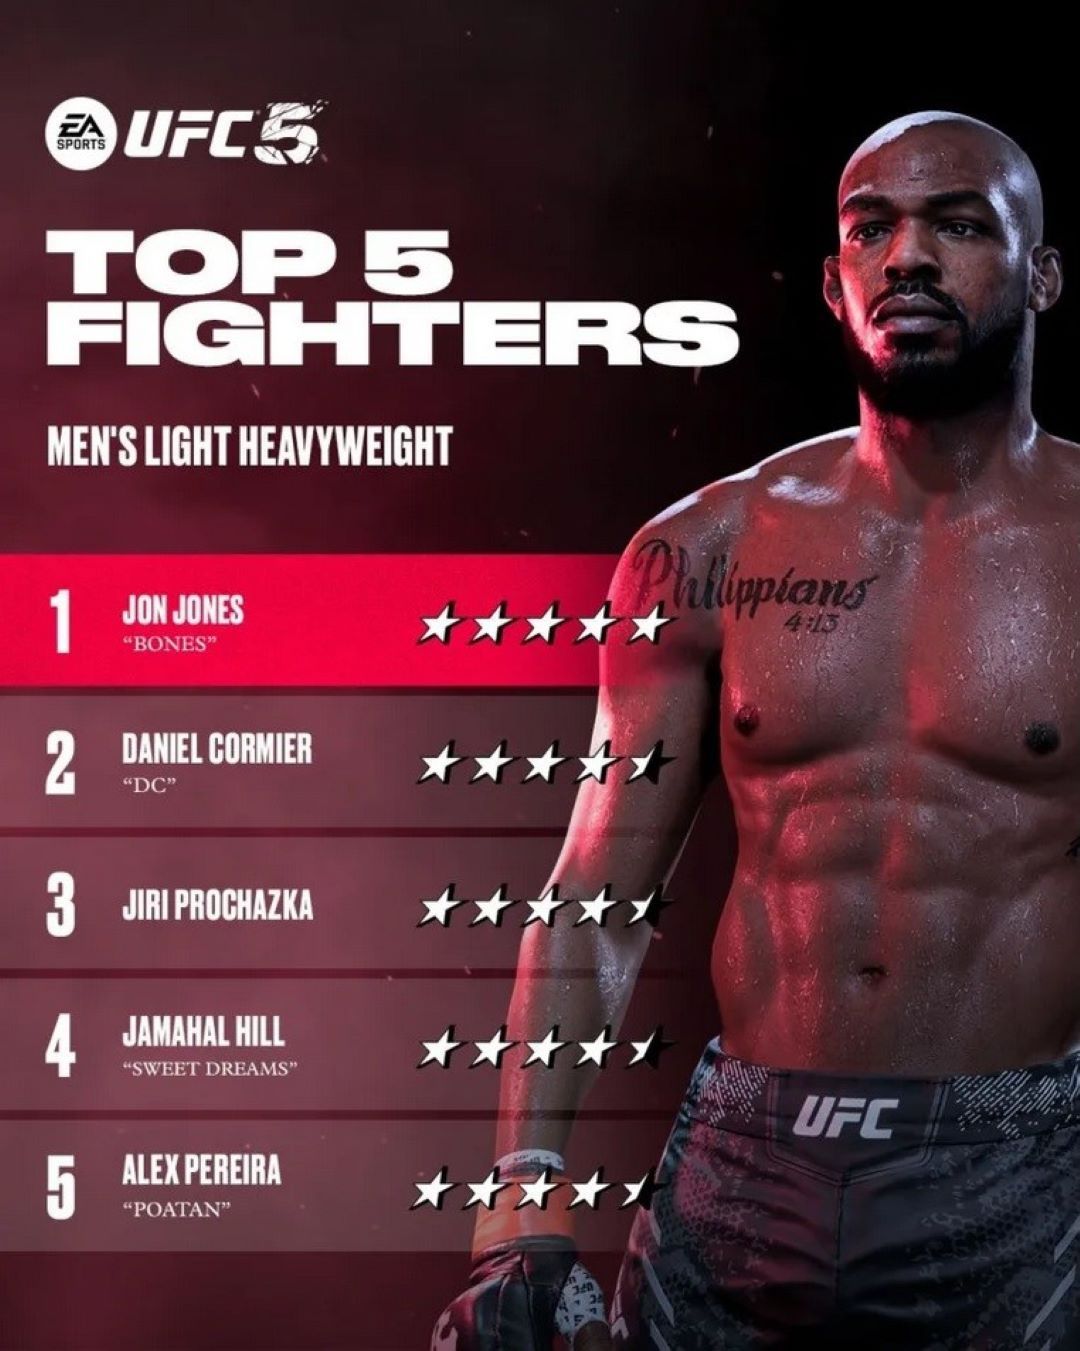 UFC 5 fighter ratings